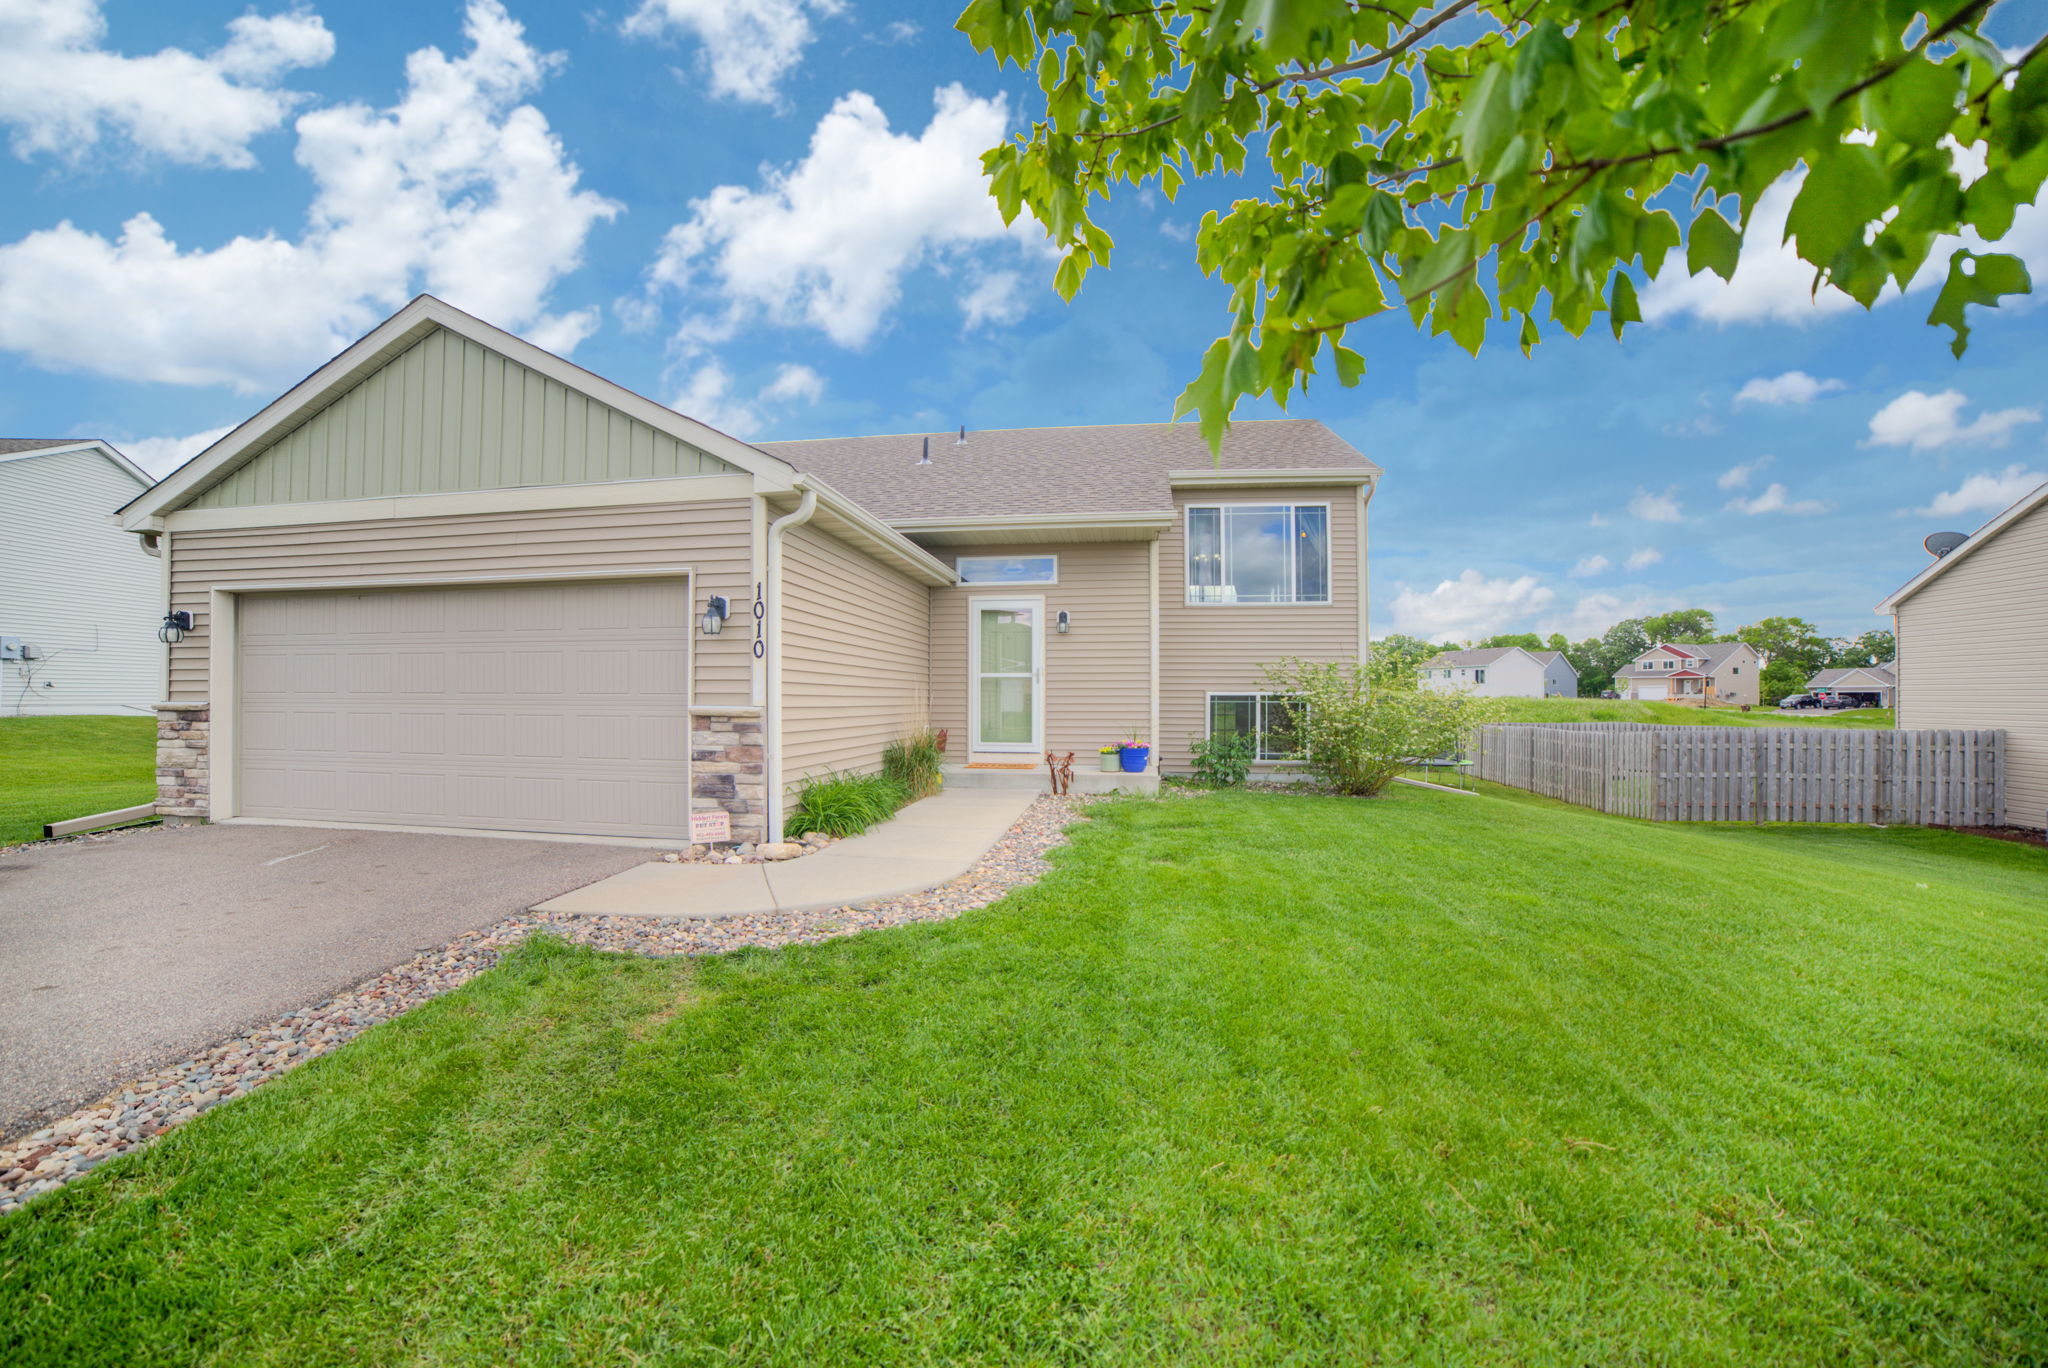  1010 Fox Crossing, Norwood Young America, MN 55397, US